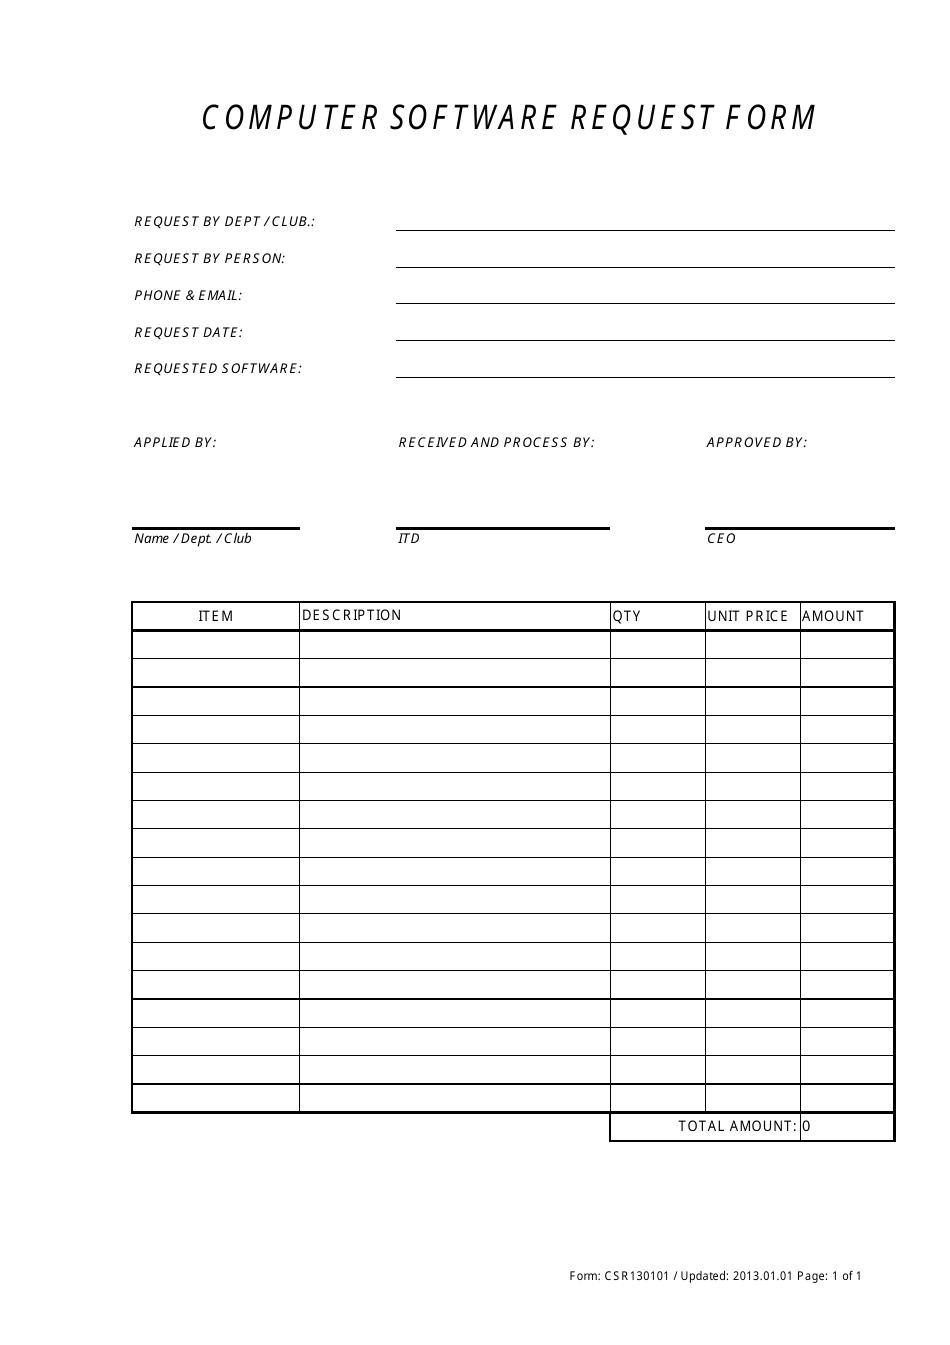 Computer Software Request Form, Page 1